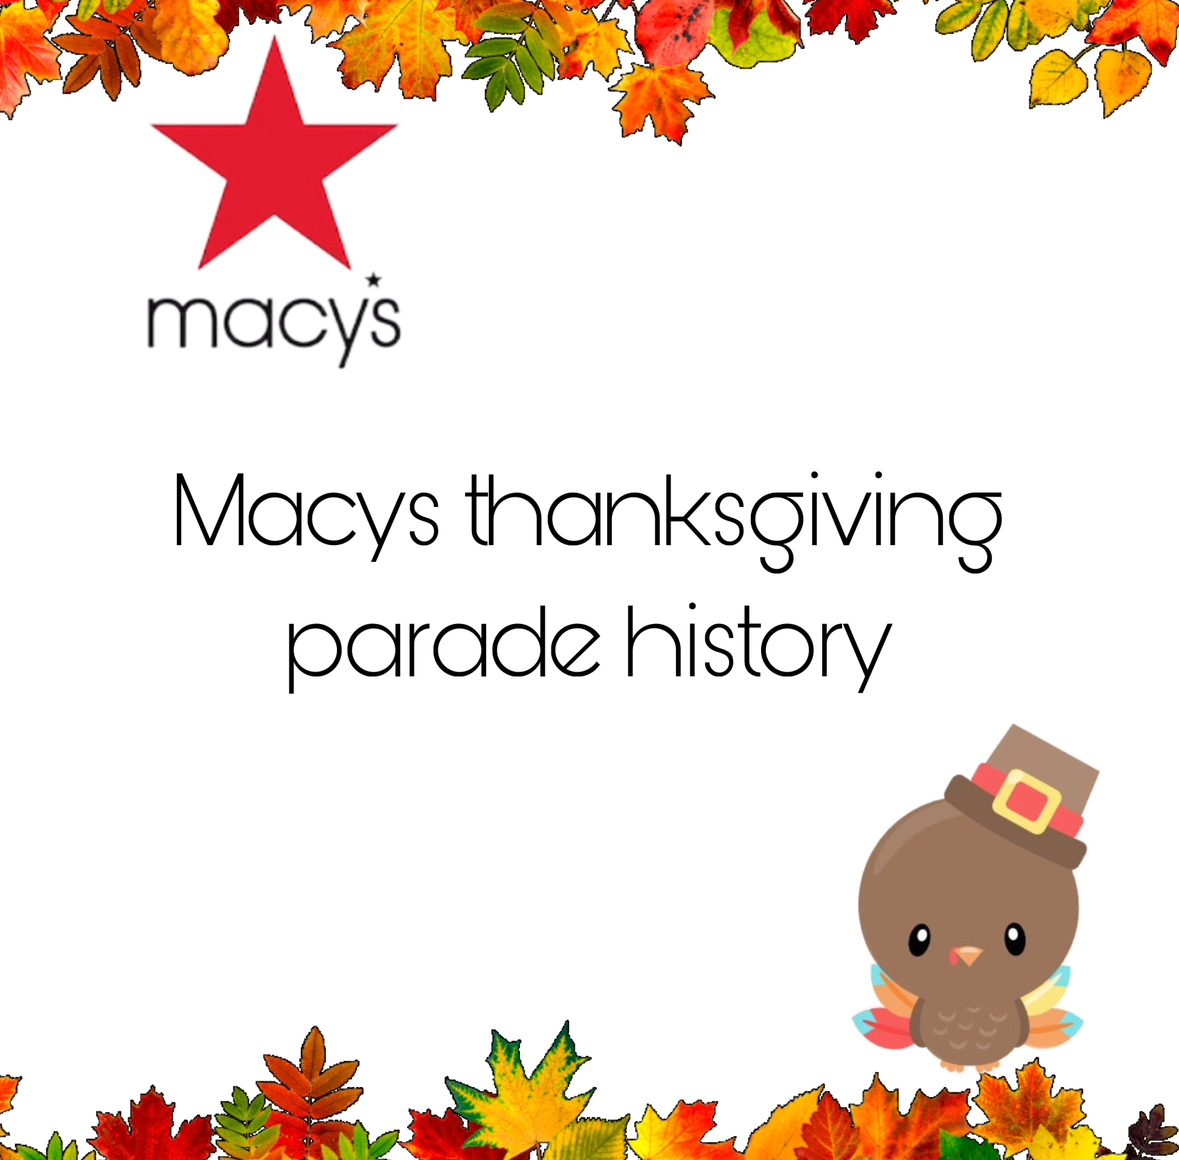 History+of+the+Macy+Thanksgiving+Parade.